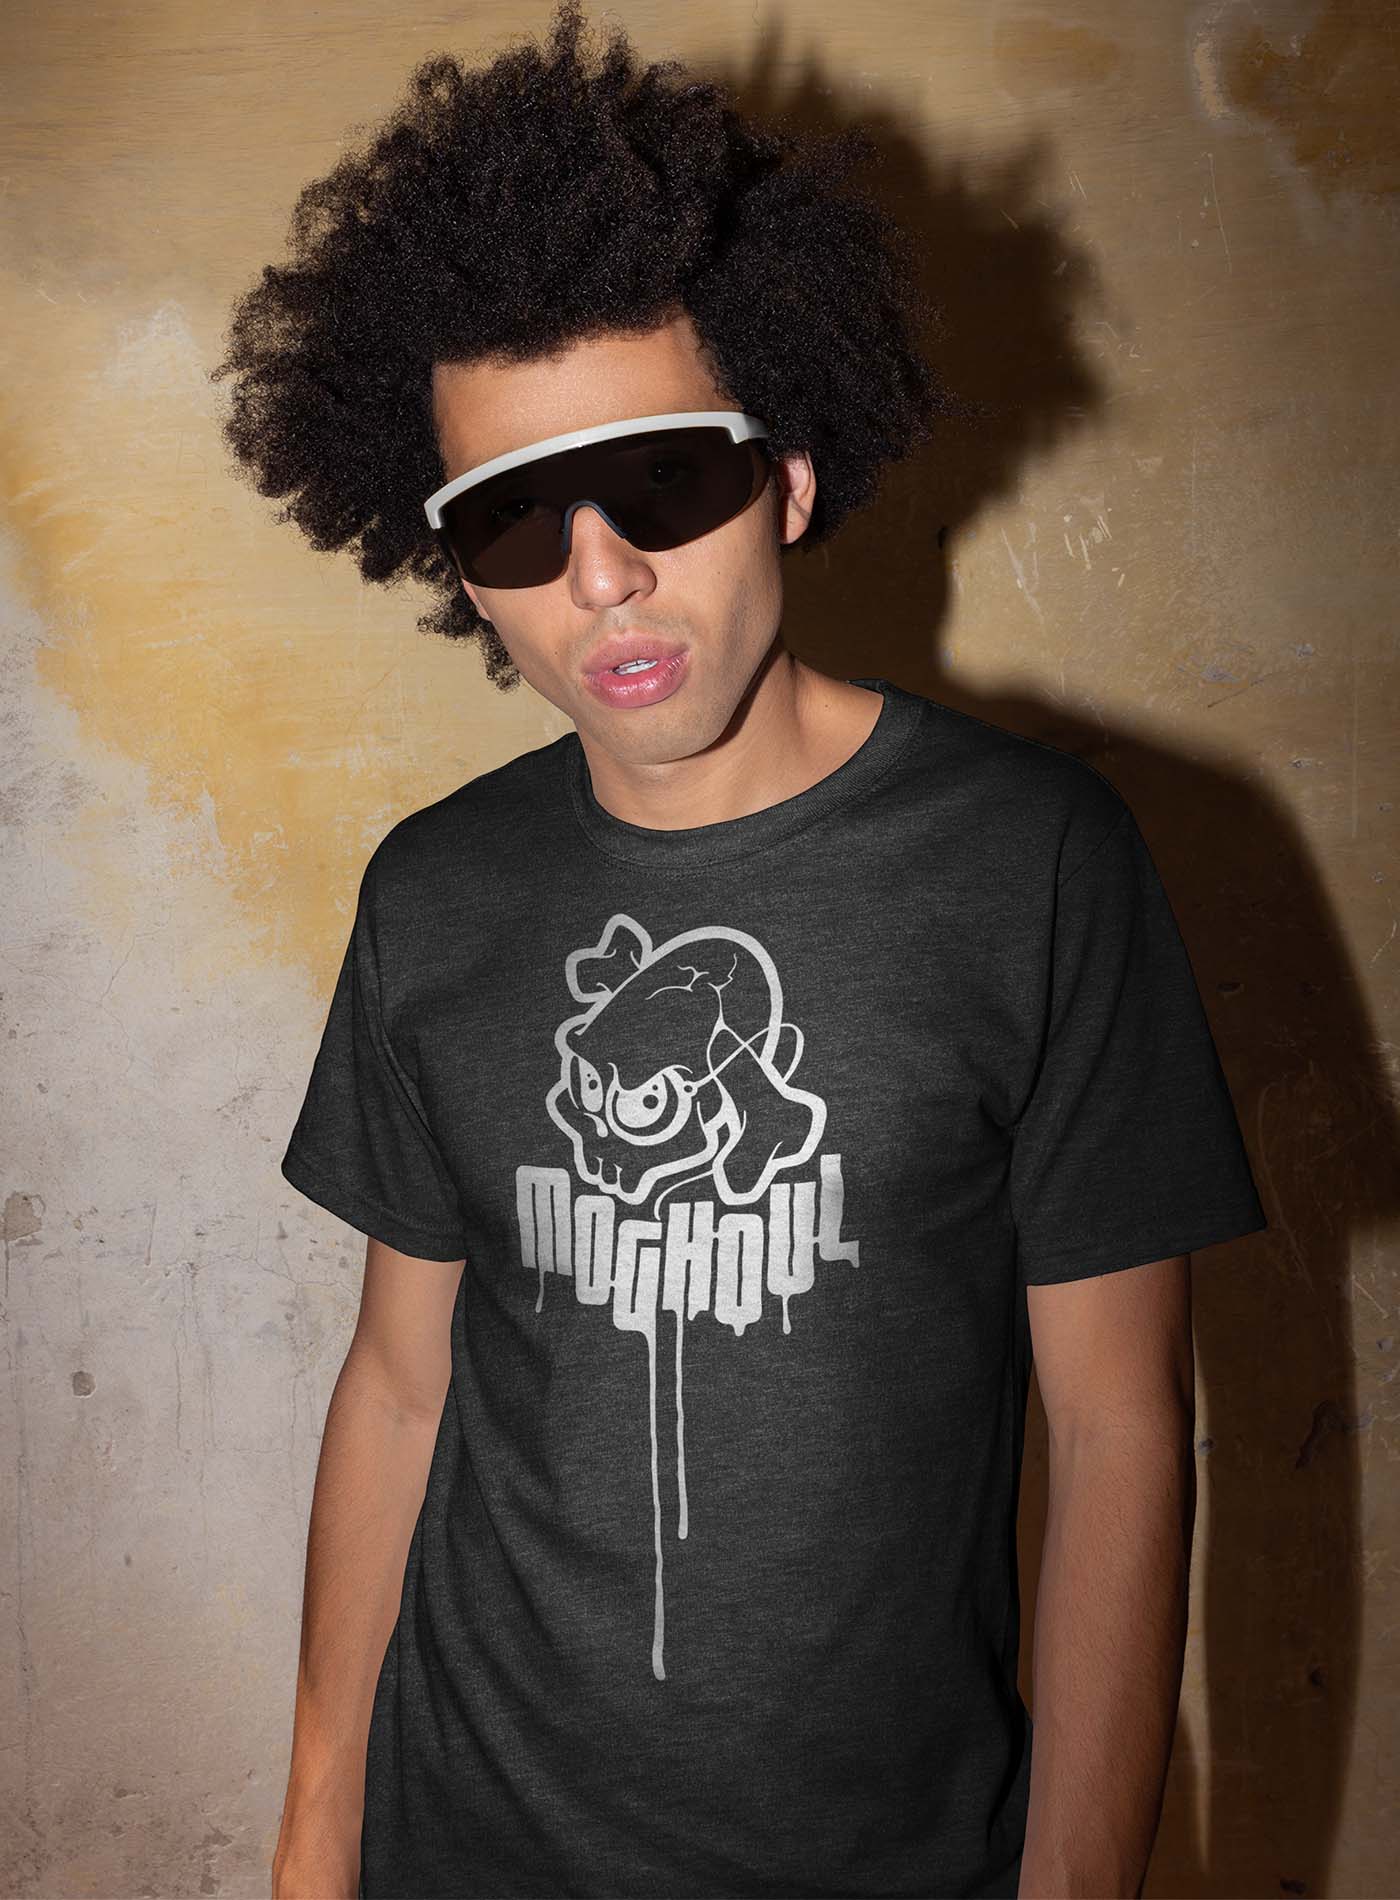 guy modeling a Heather black unisex t-shirt featuring a yellow Mr. Shade Moghoul logo by G.M. Meave.